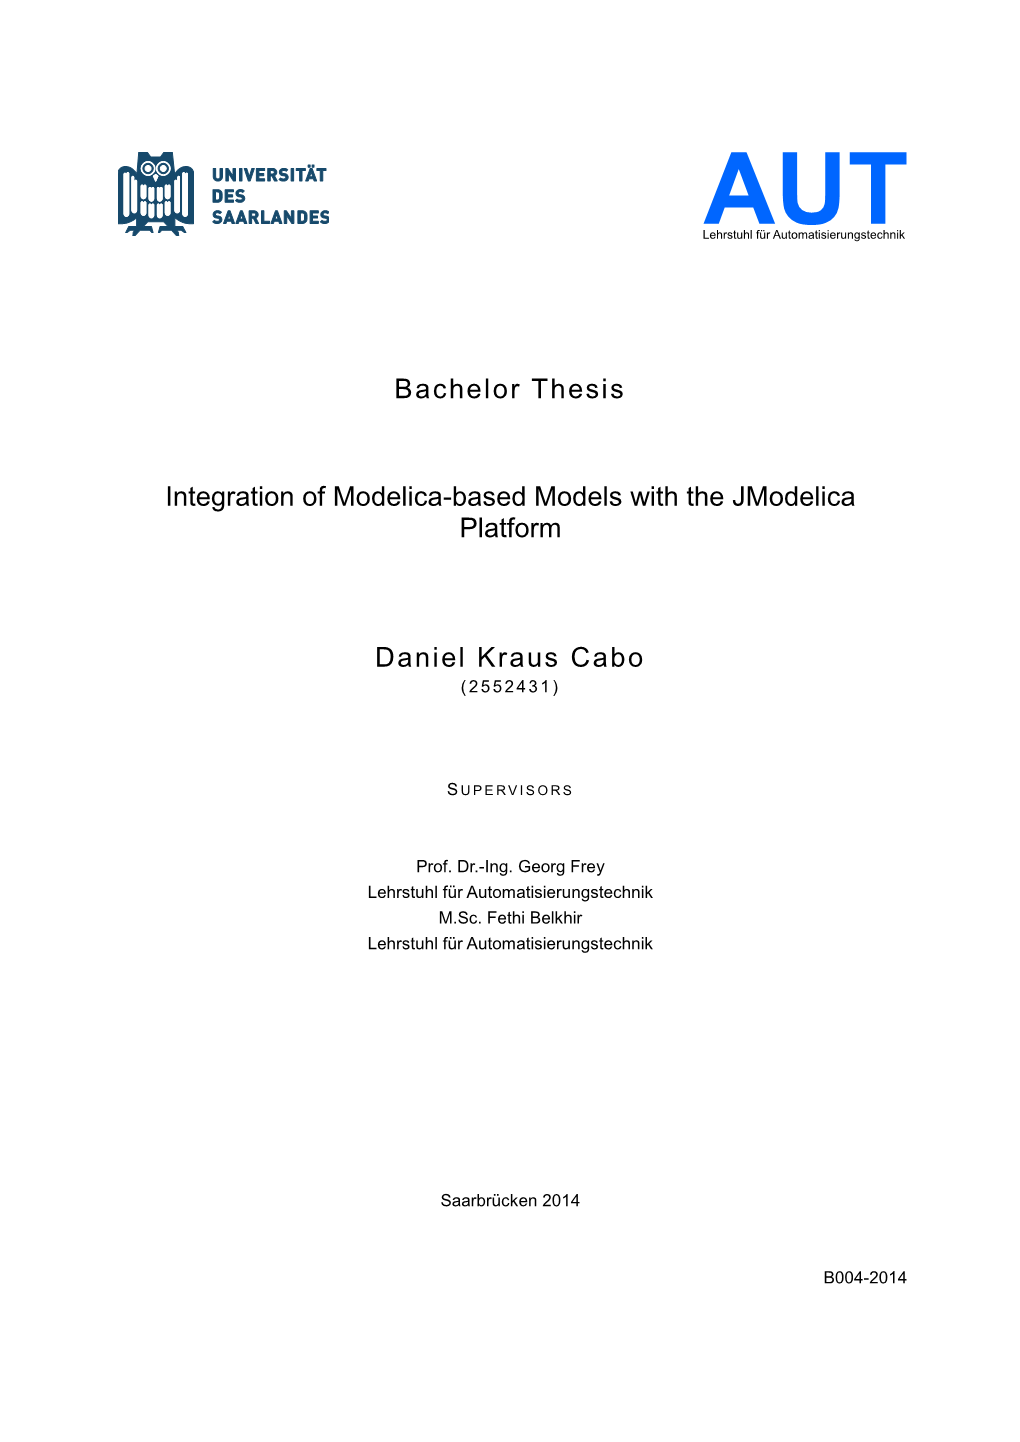 Bachelor Thesis Integration of Modelica-Based Models with The